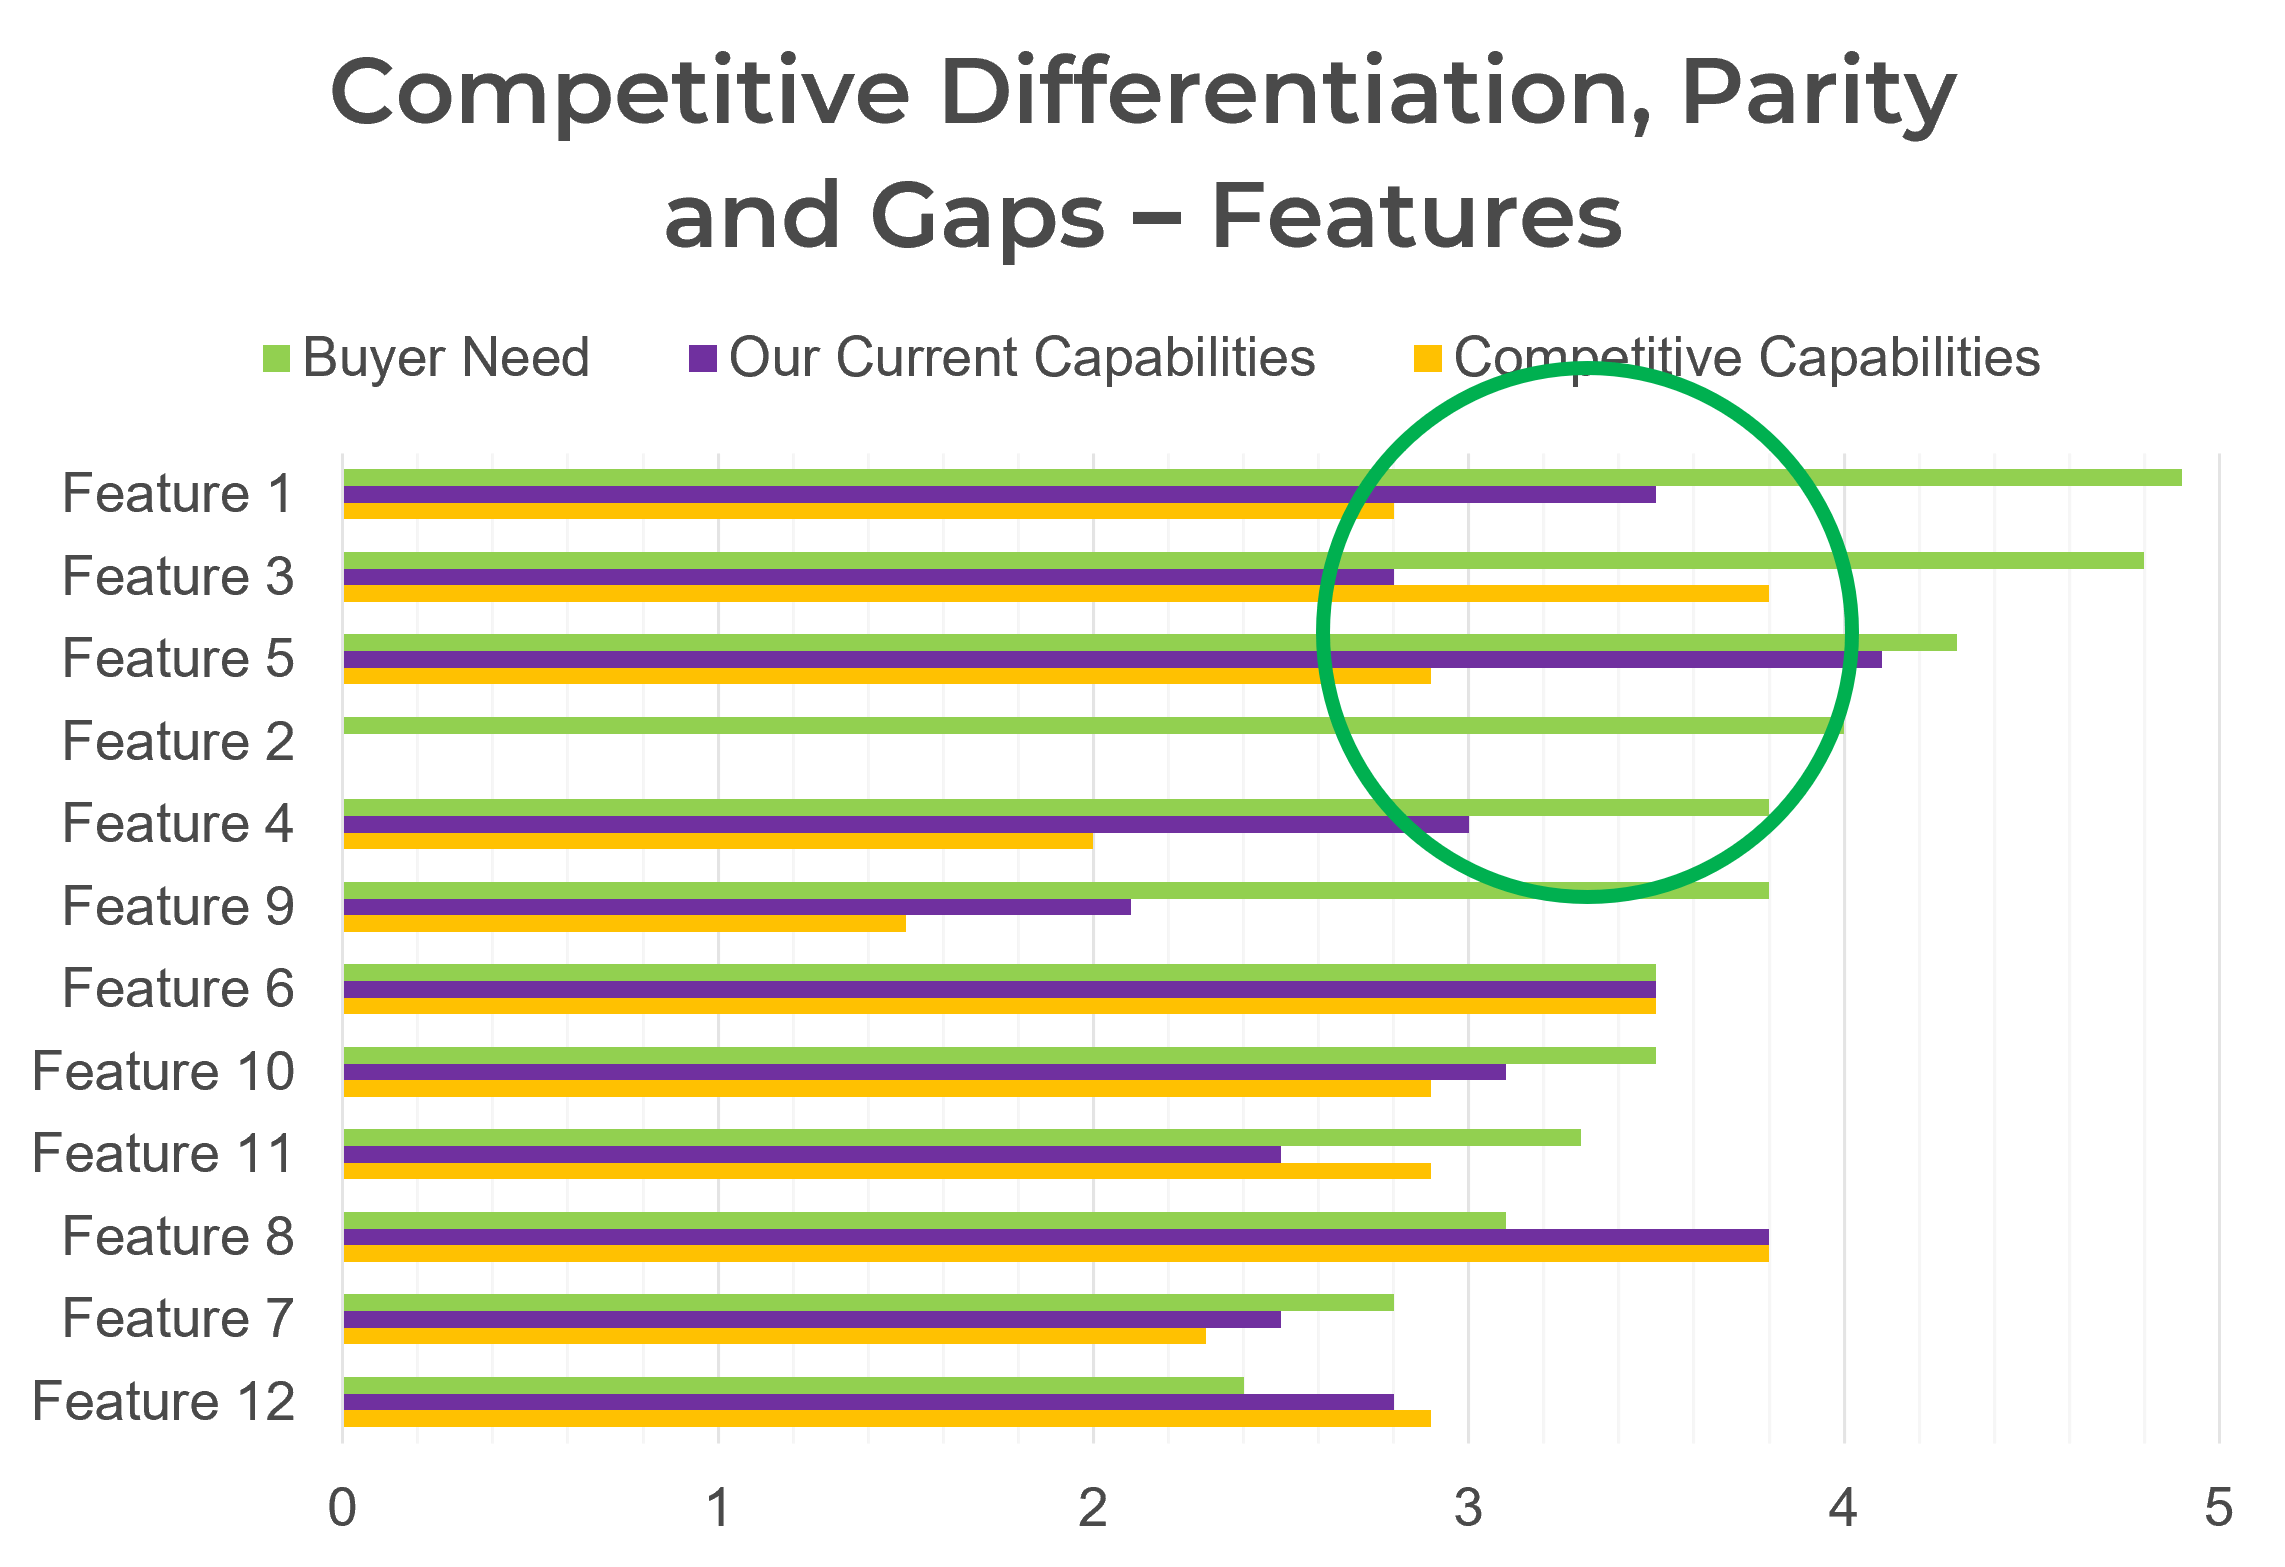 Example bar chart for 'Competitive Differentiation, Parity and Gaps – Features' comparing ratings of 'Buyer Need', 'Our Current Capabilities', and 'Competitive Capabilities' for each 'Feature'.